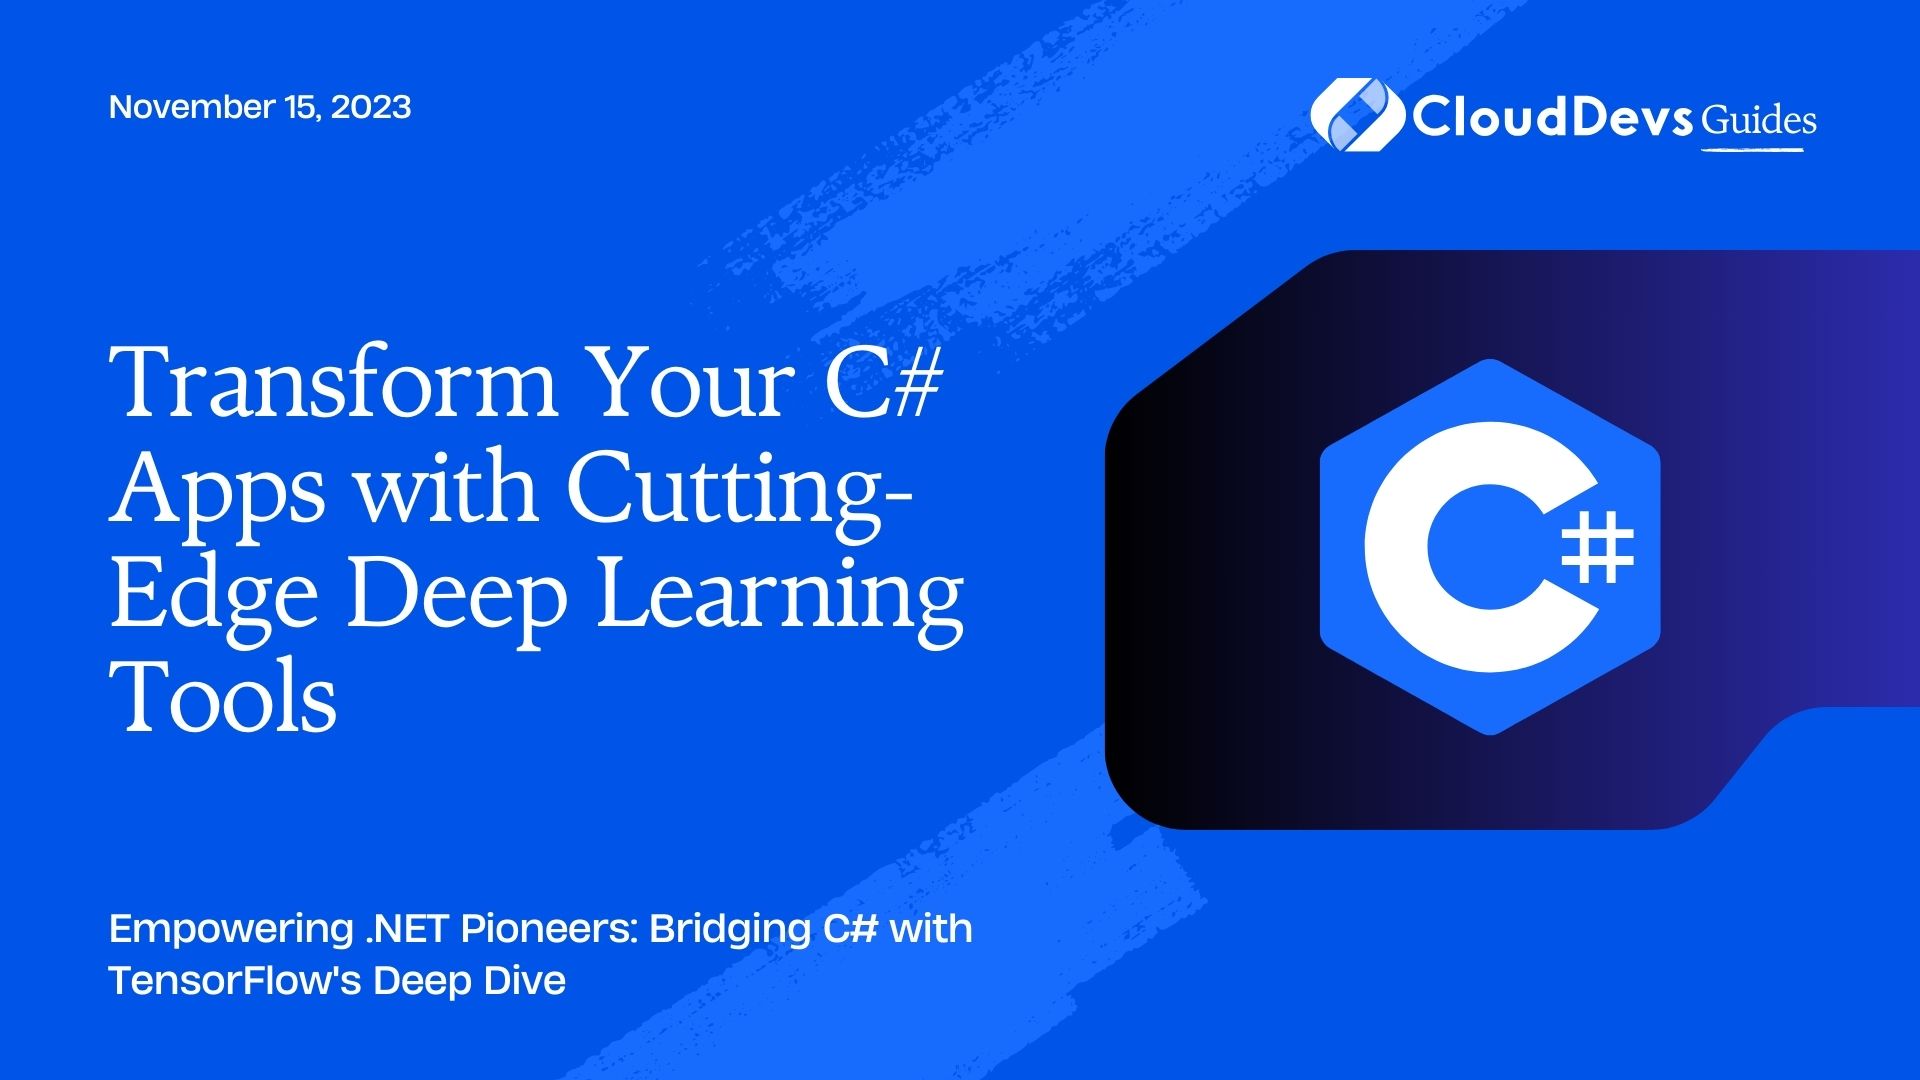 Transform Your C# Apps with Cutting-Edge Deep Learning Tools